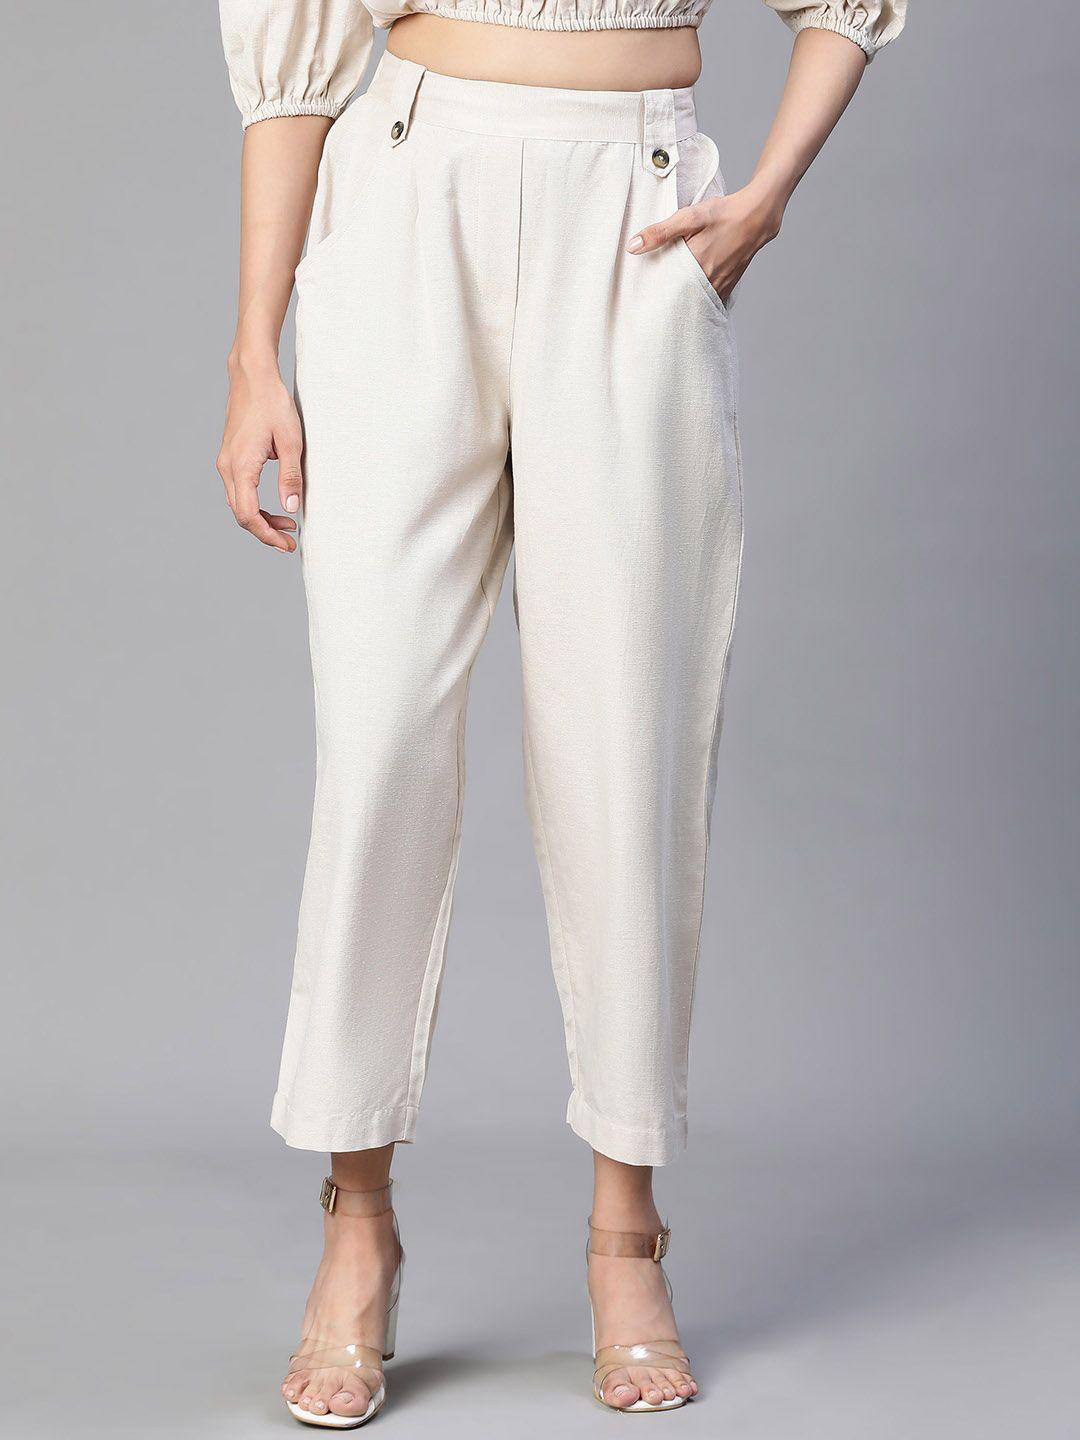 oxolloxo-women-relaxed-loose-fit-easy-wash-pleated-cotton-trousers